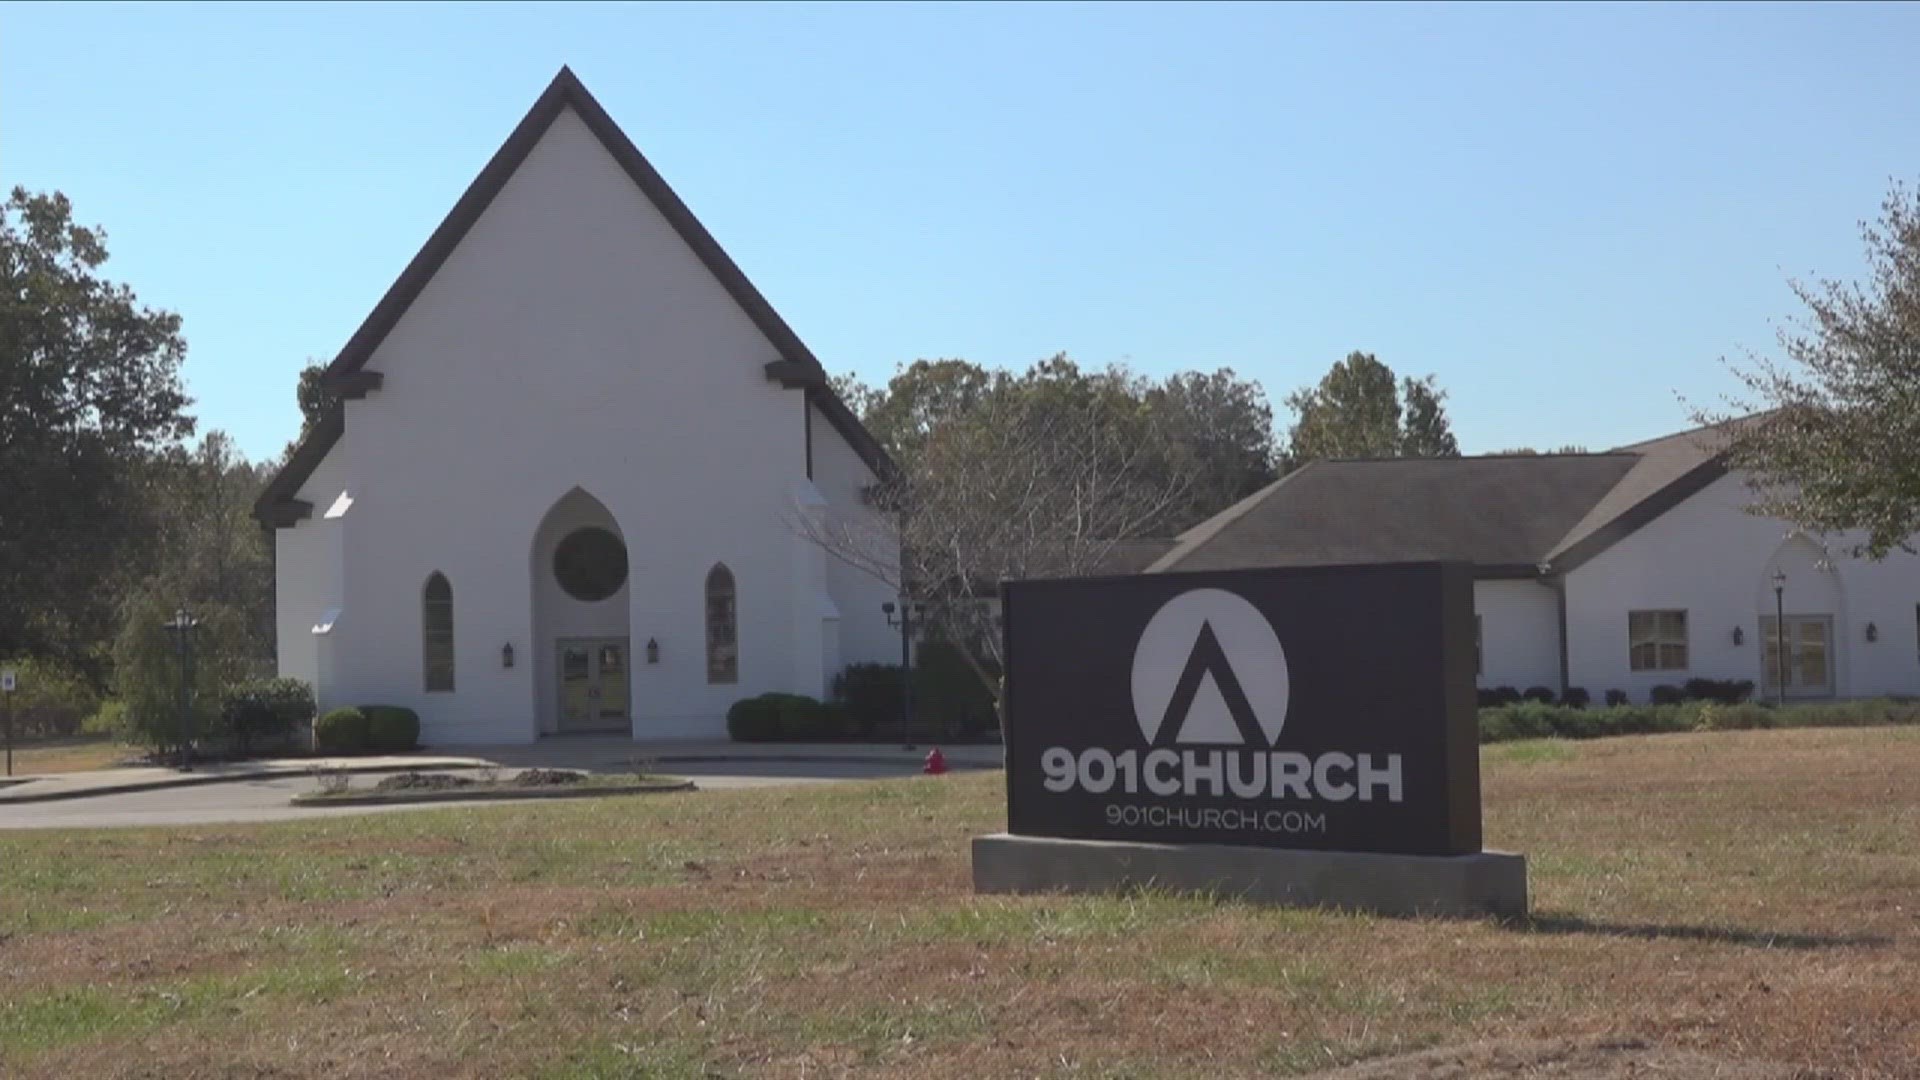 A parishioner had accused pastor Stevie Flockhart of using his personal information to open a credit card in his name.